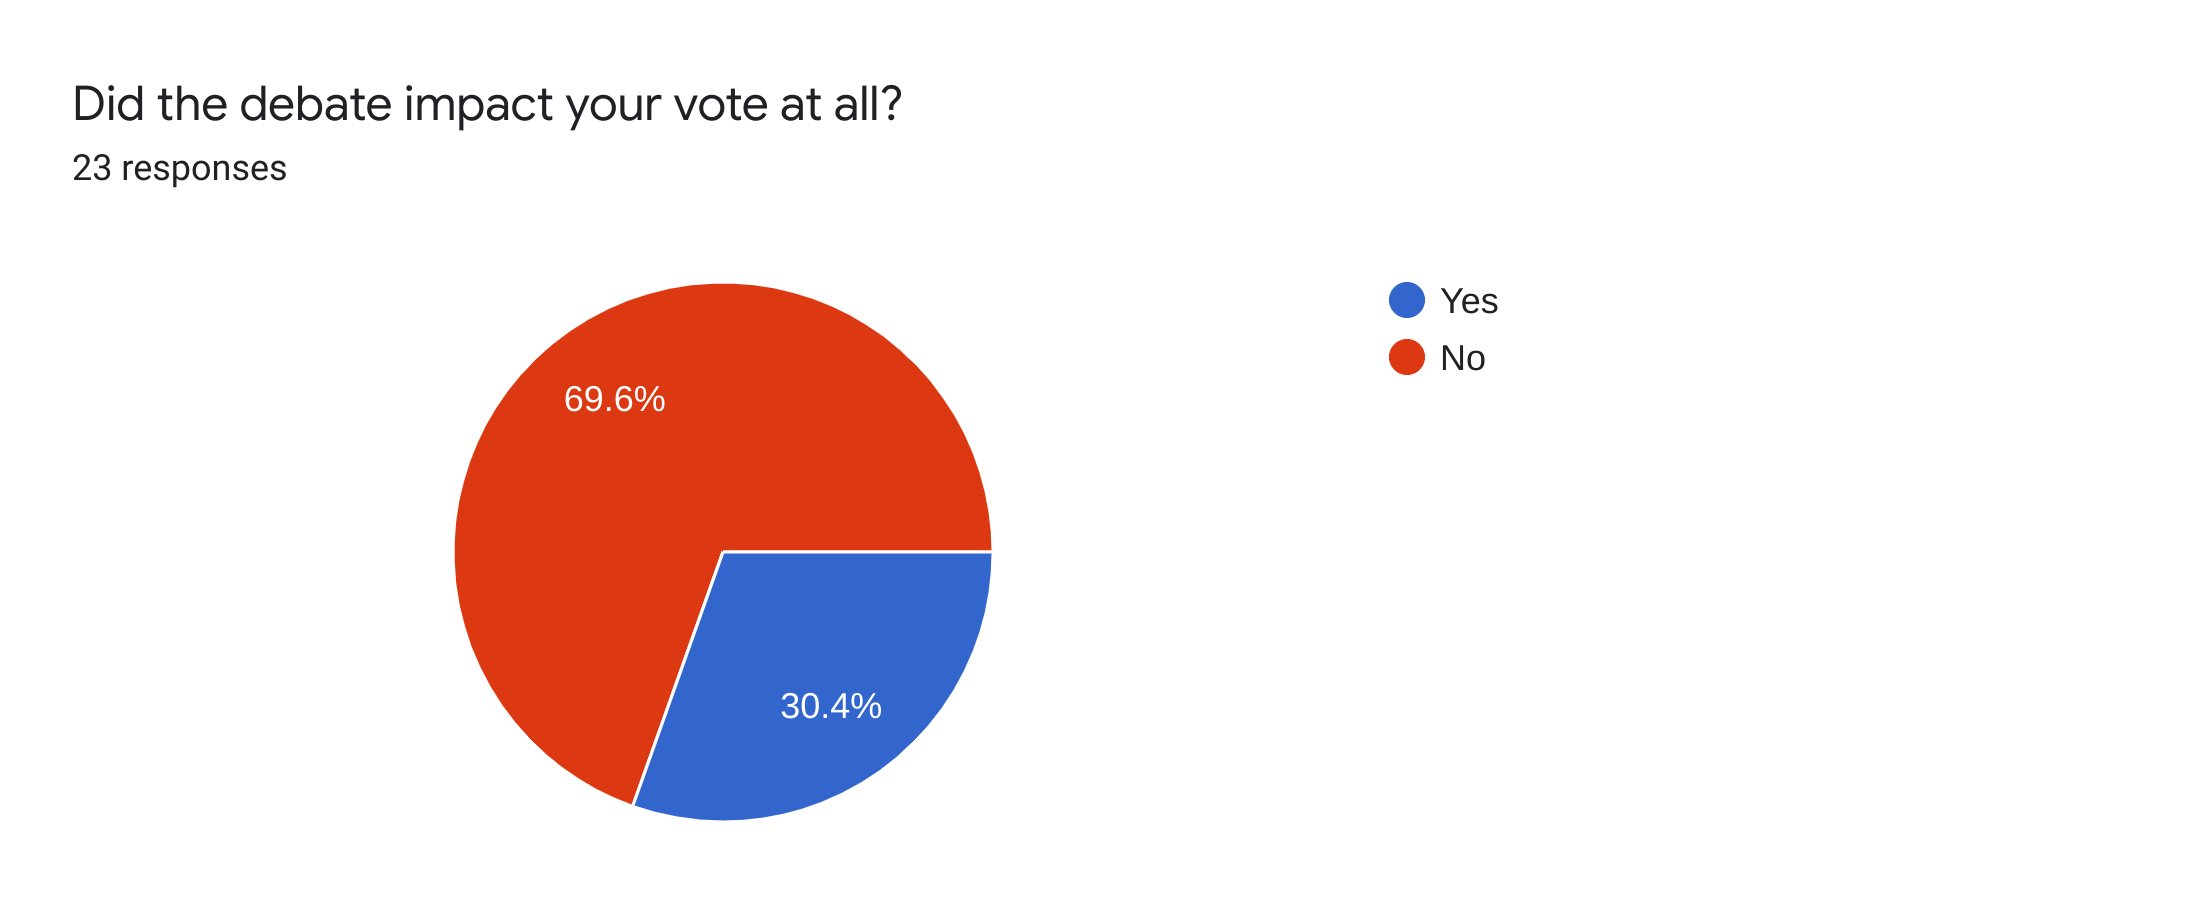 Forms response chart. Question title: Did the debate impact your vote at all?. Number of responses: 23 responses.